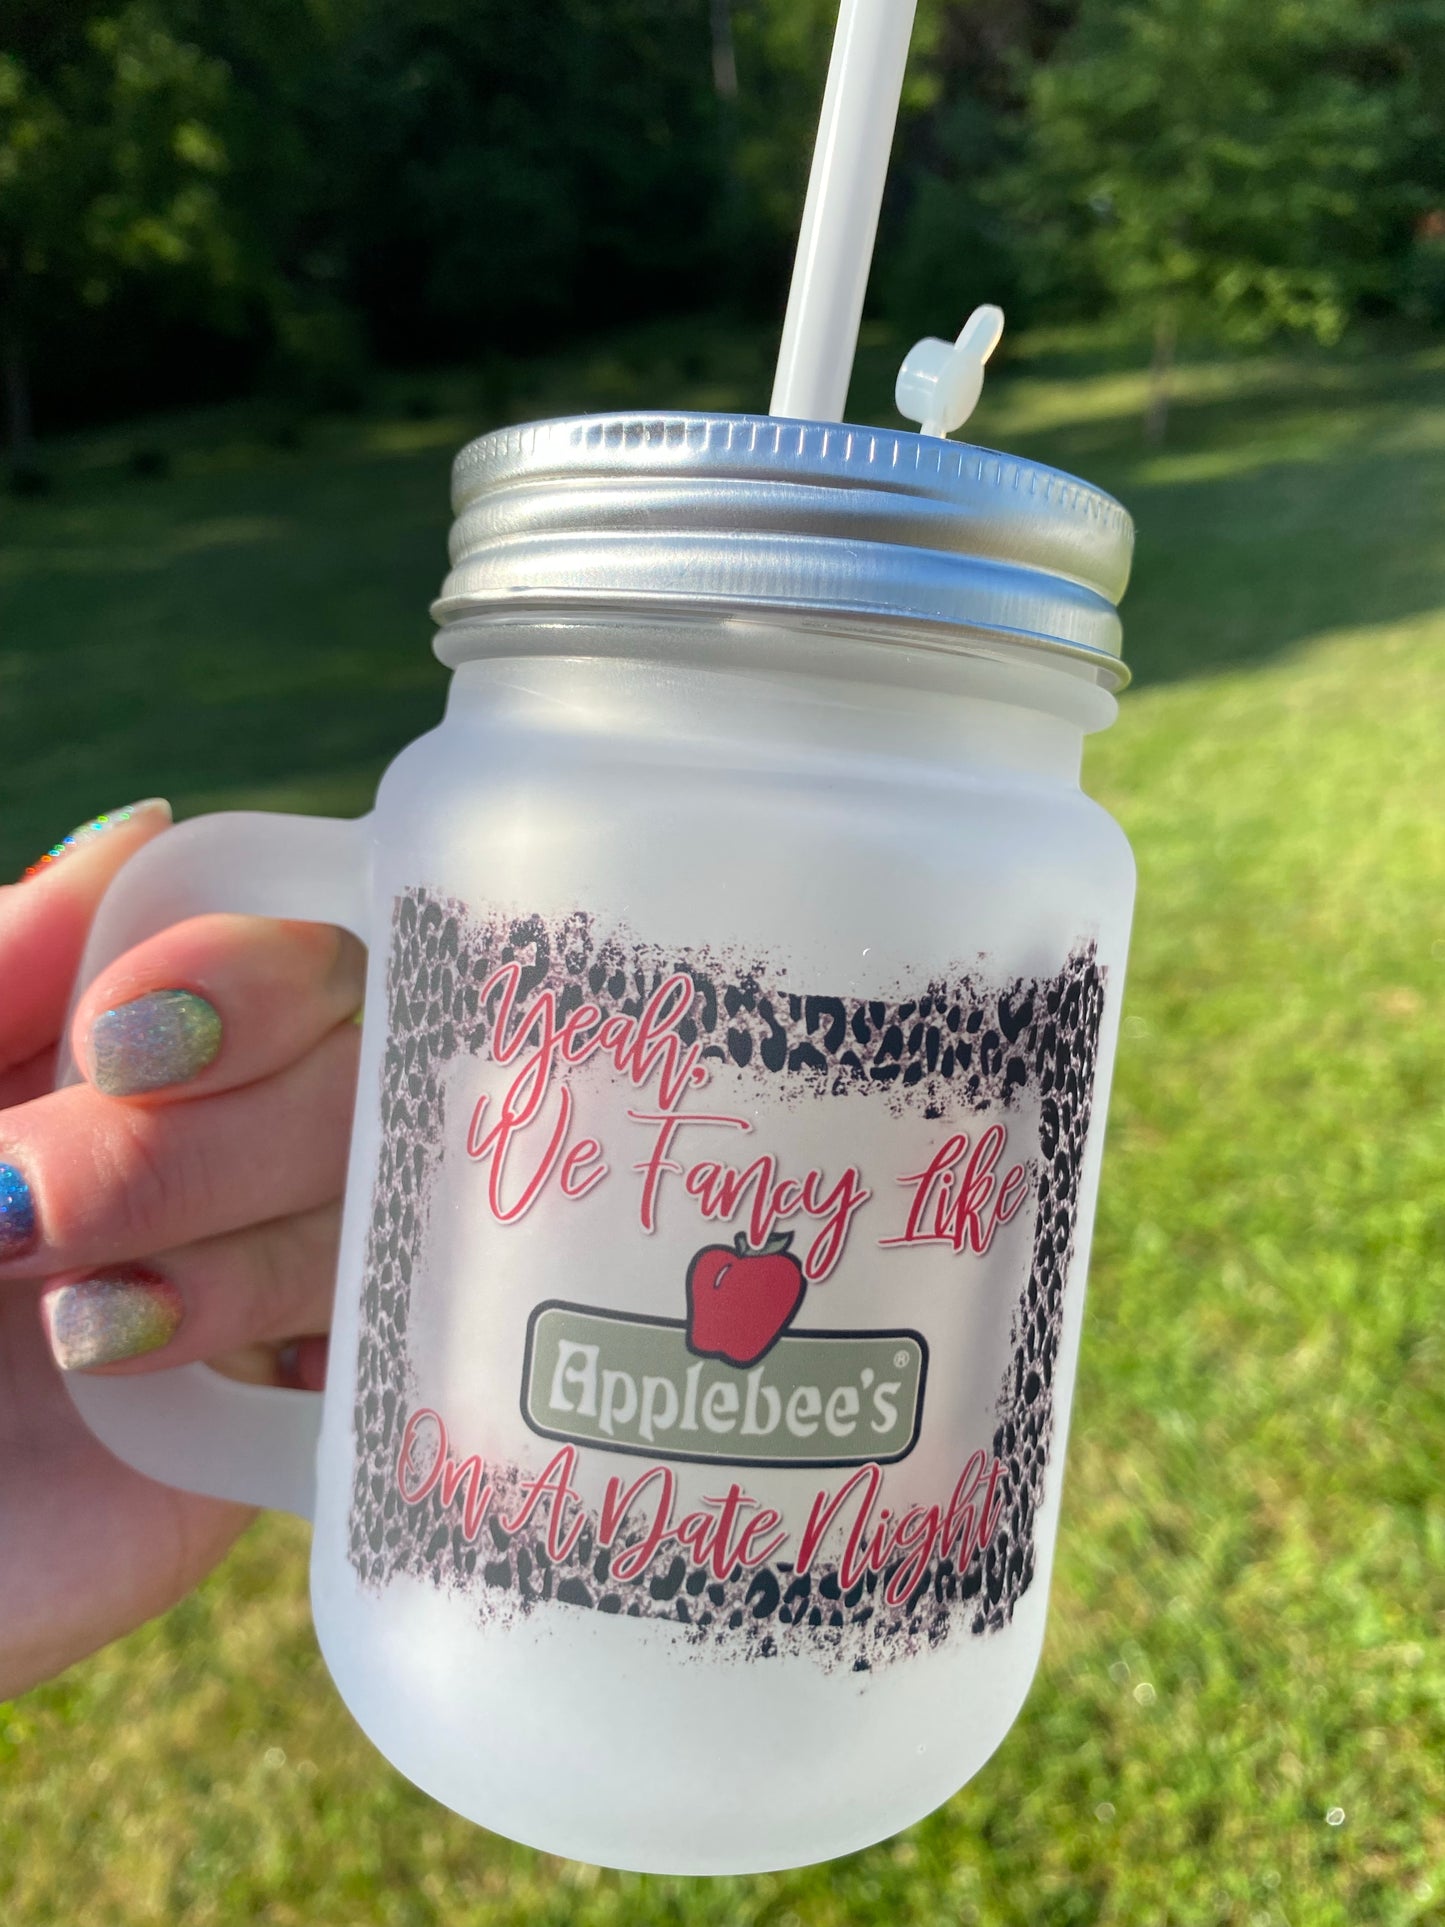 Fancy Like Applebee’s on a Date Night 12 oz Frosted Printed Jar Mug with Straw